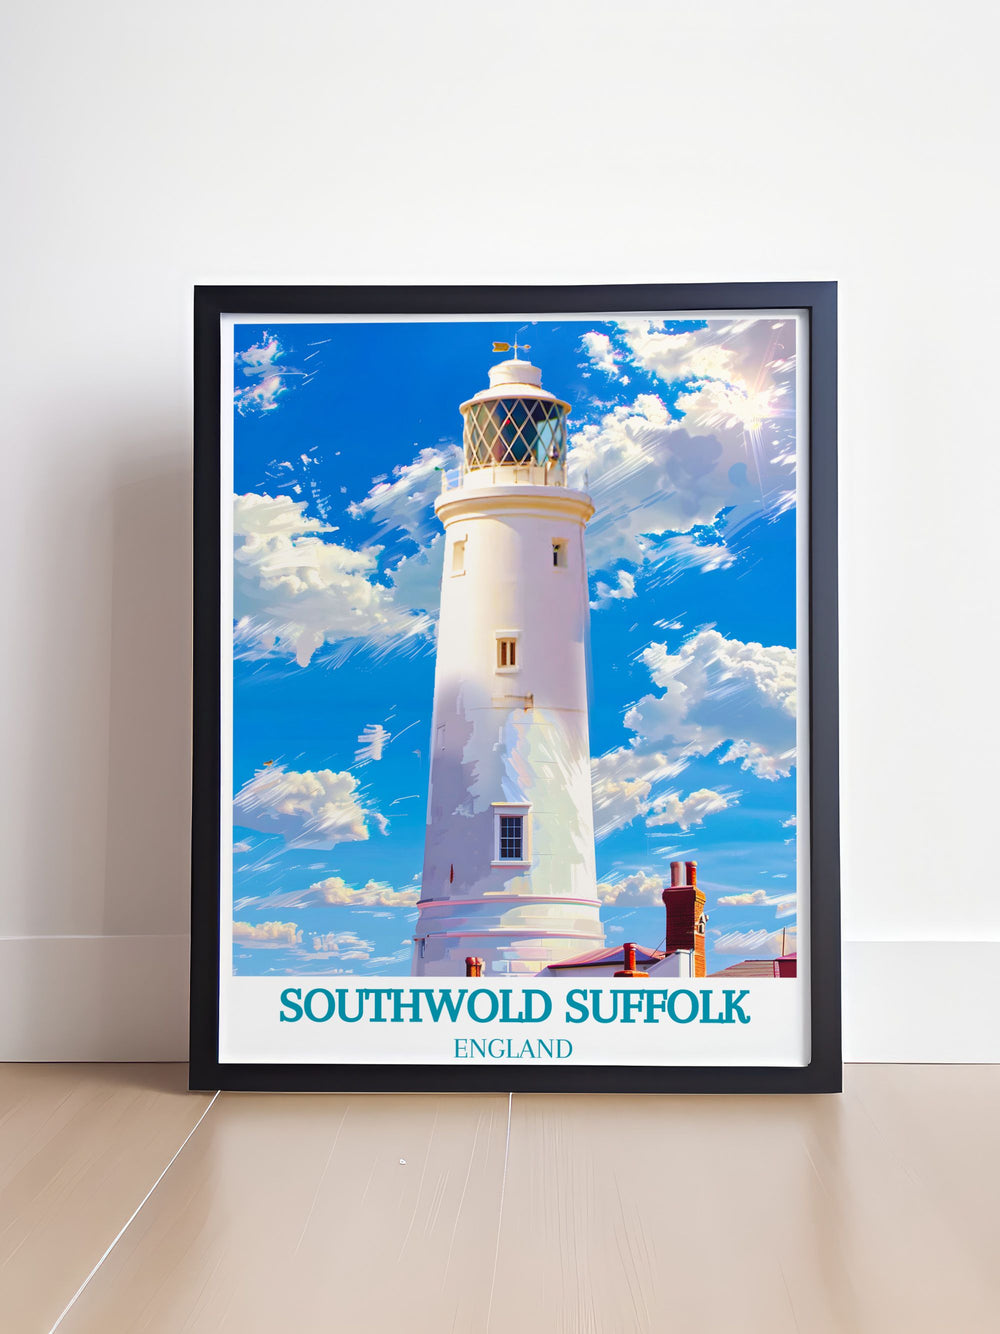 Immerse yourself in the scenic wonders of Southwold with this travel poster, featuring the lighthouse and the picturesque coastline.